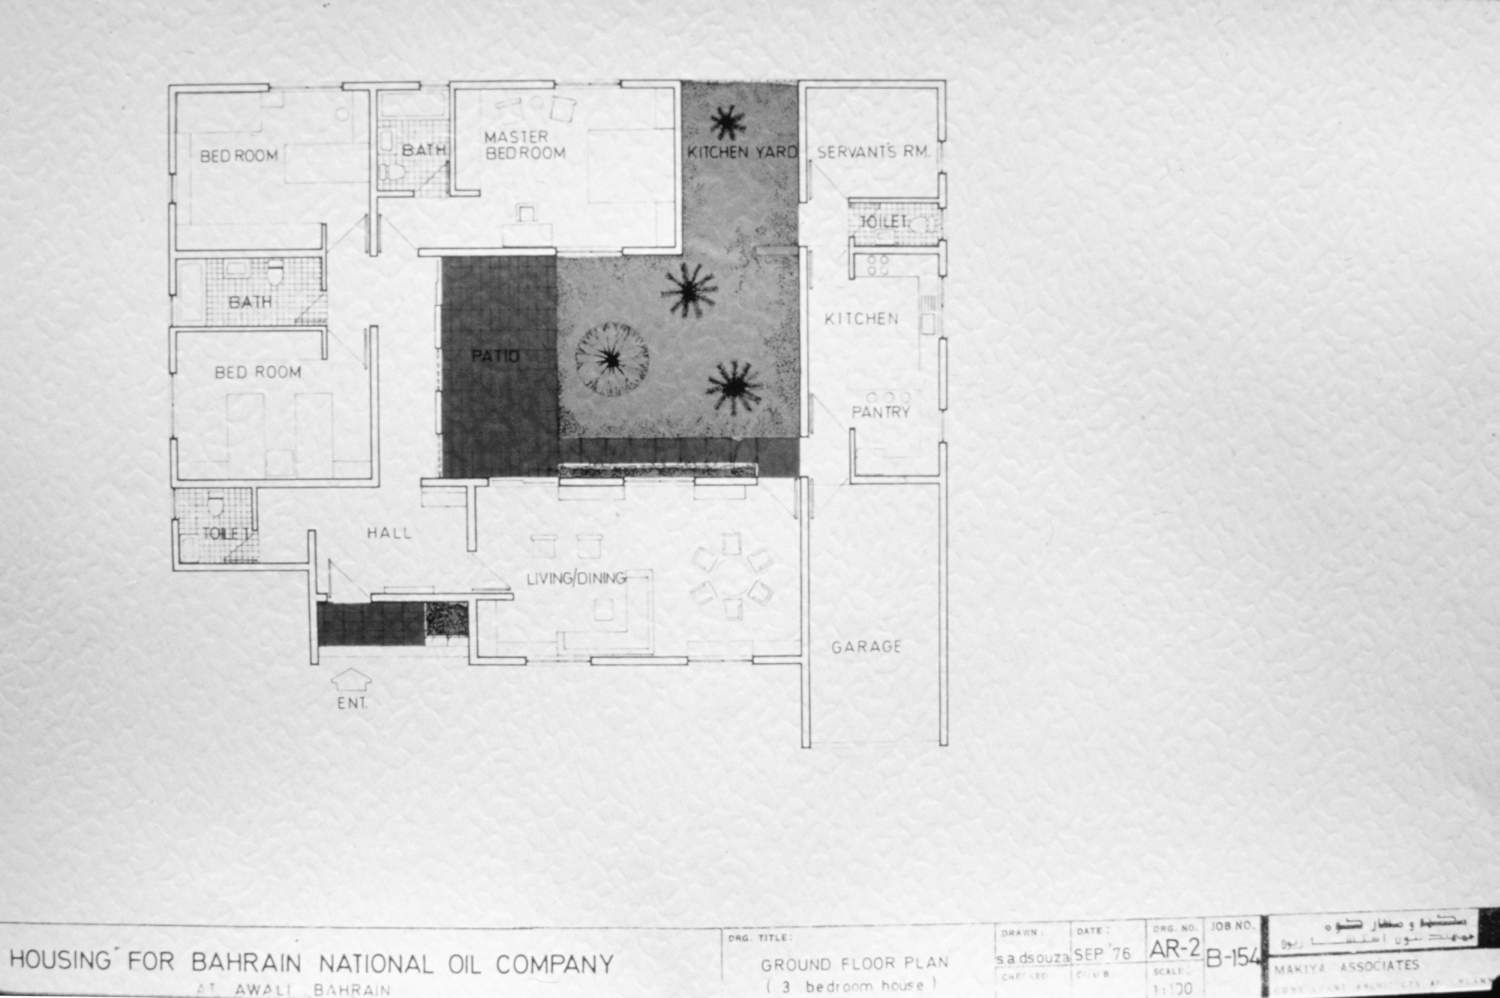 <p>Floor plan for a 3 bedroom house.</p>